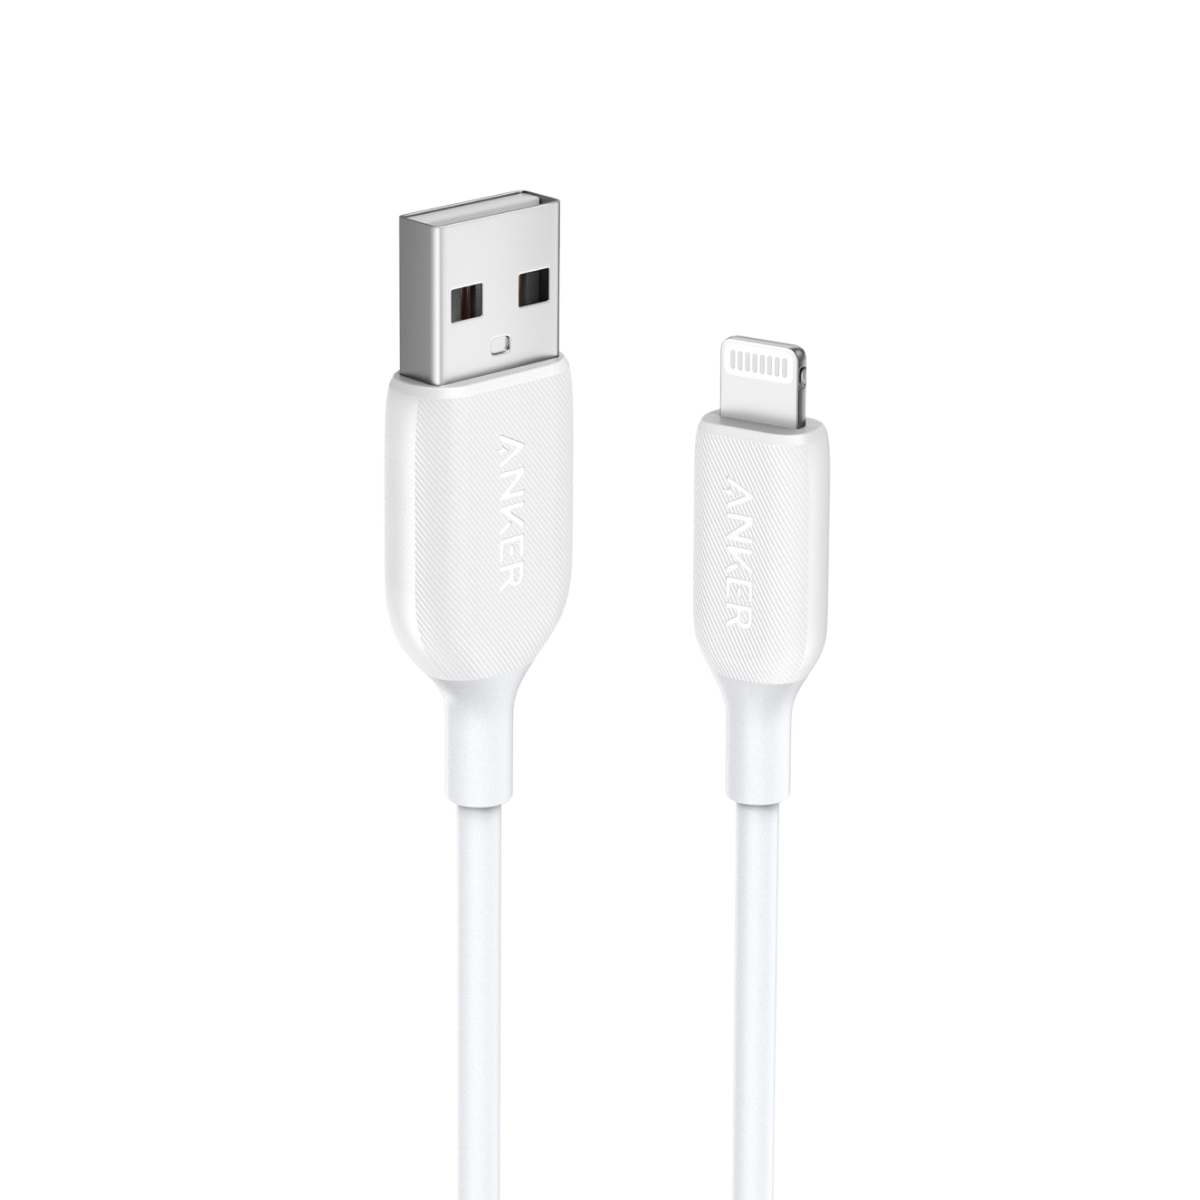 Anker <b>541</b> USB-A to Lightning Cable(3 ft / 6 ft)